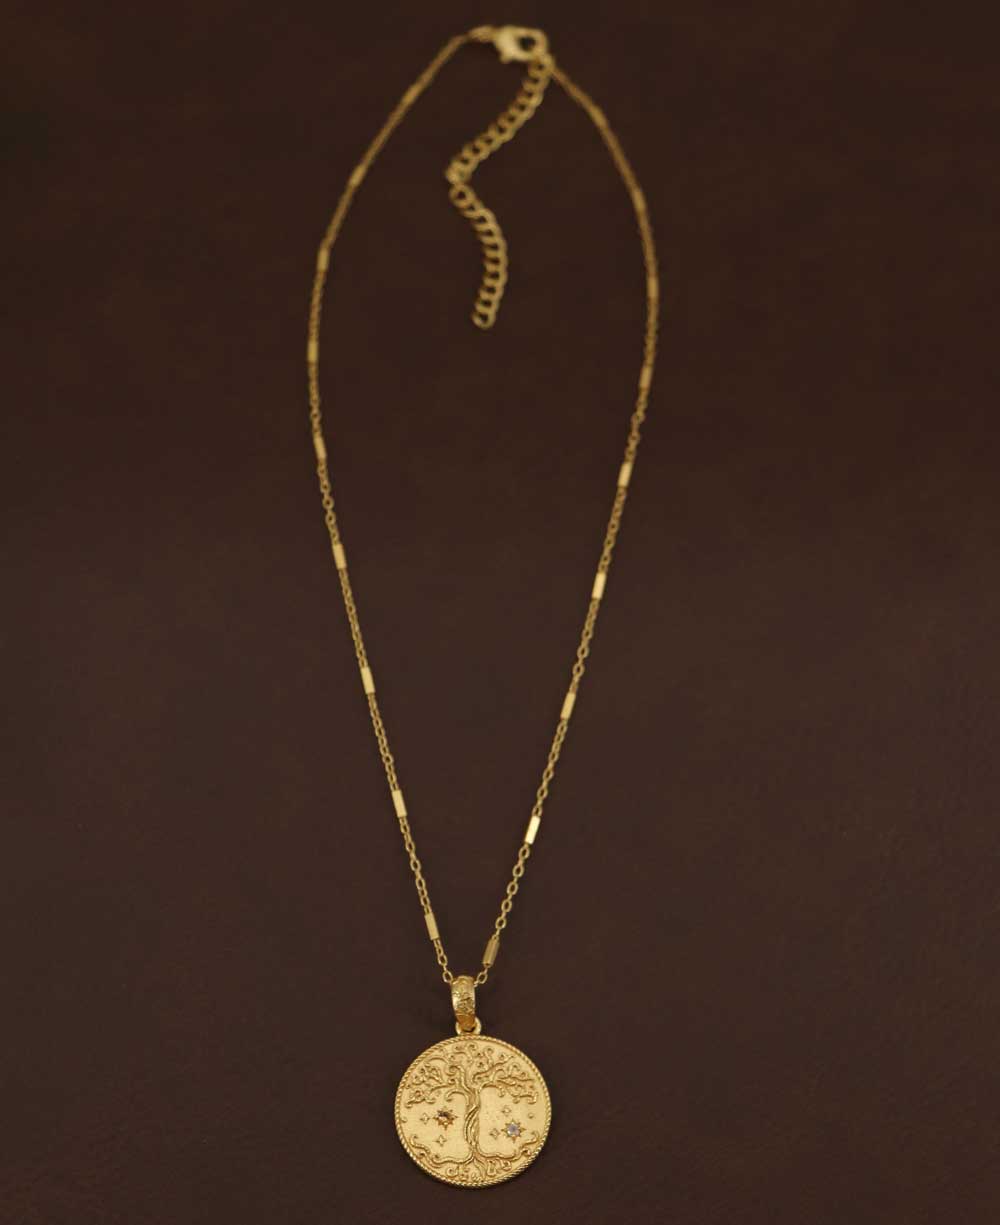 Celestial Tree of Life Gold Plated Necklace - Necklaces